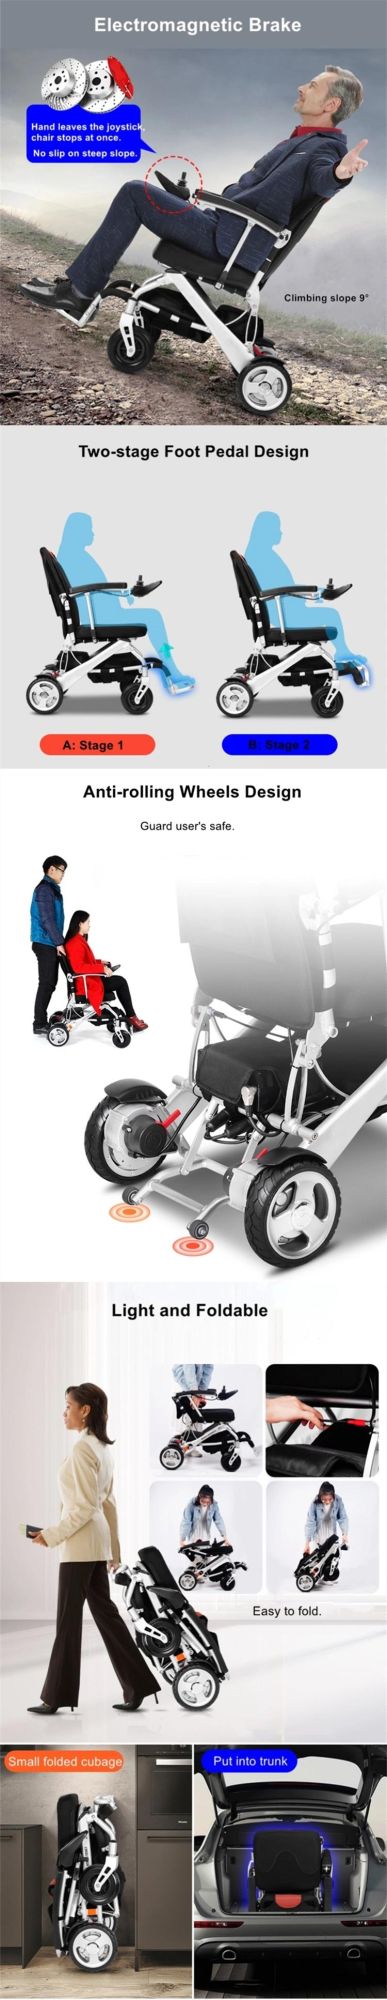 250W 12ah Lithium Battery Handicapped Folding Portable Electric Wheelchair